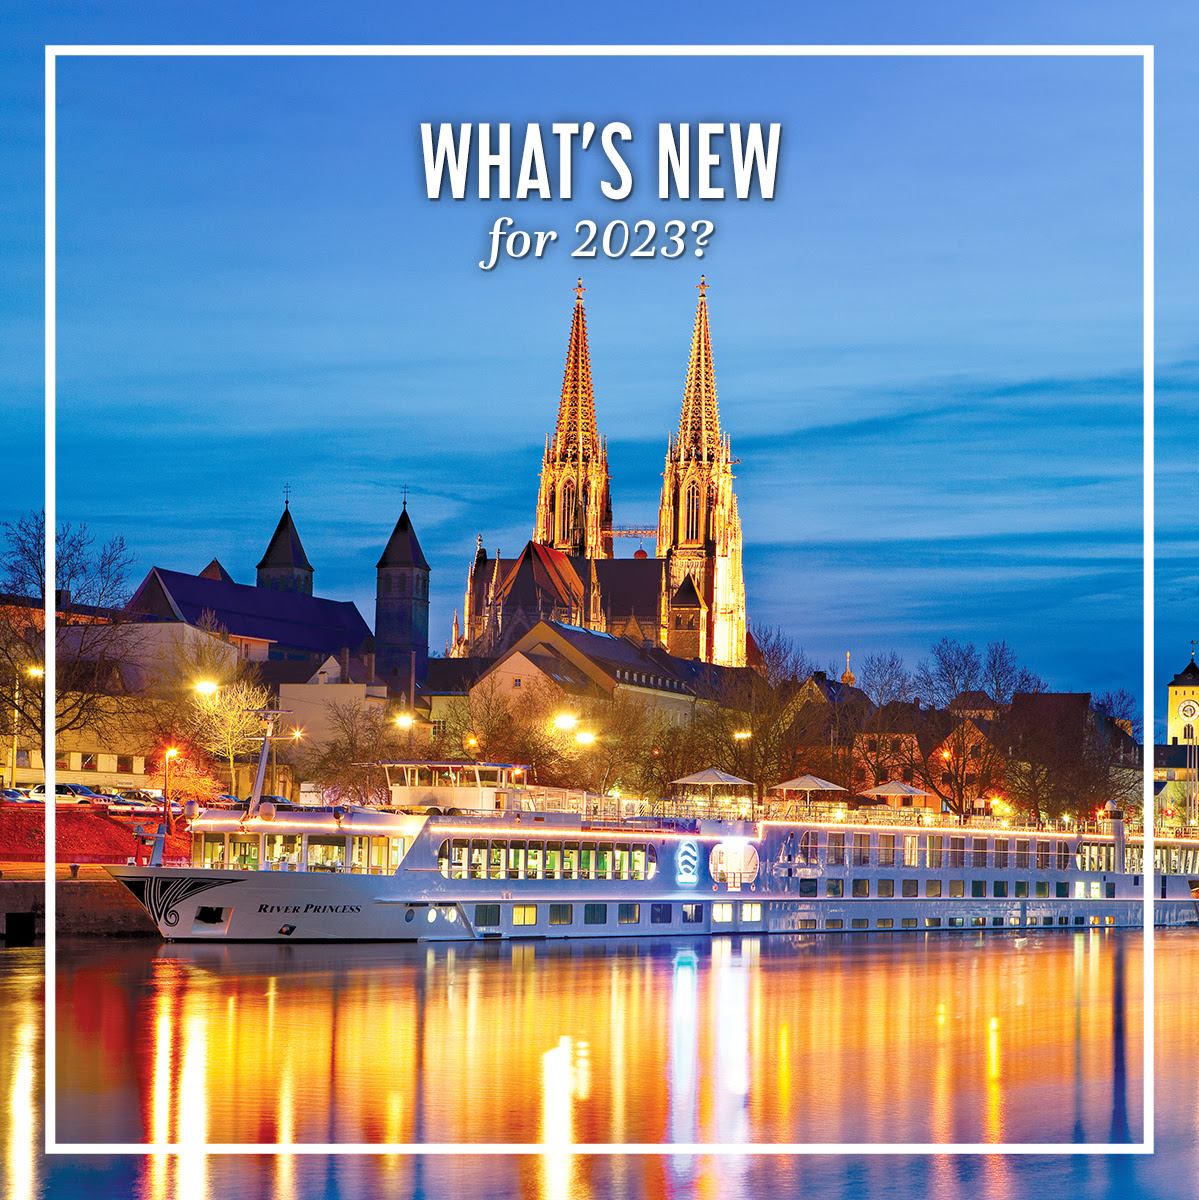 Uniworld Boutique River Cruises What's New for 2023?